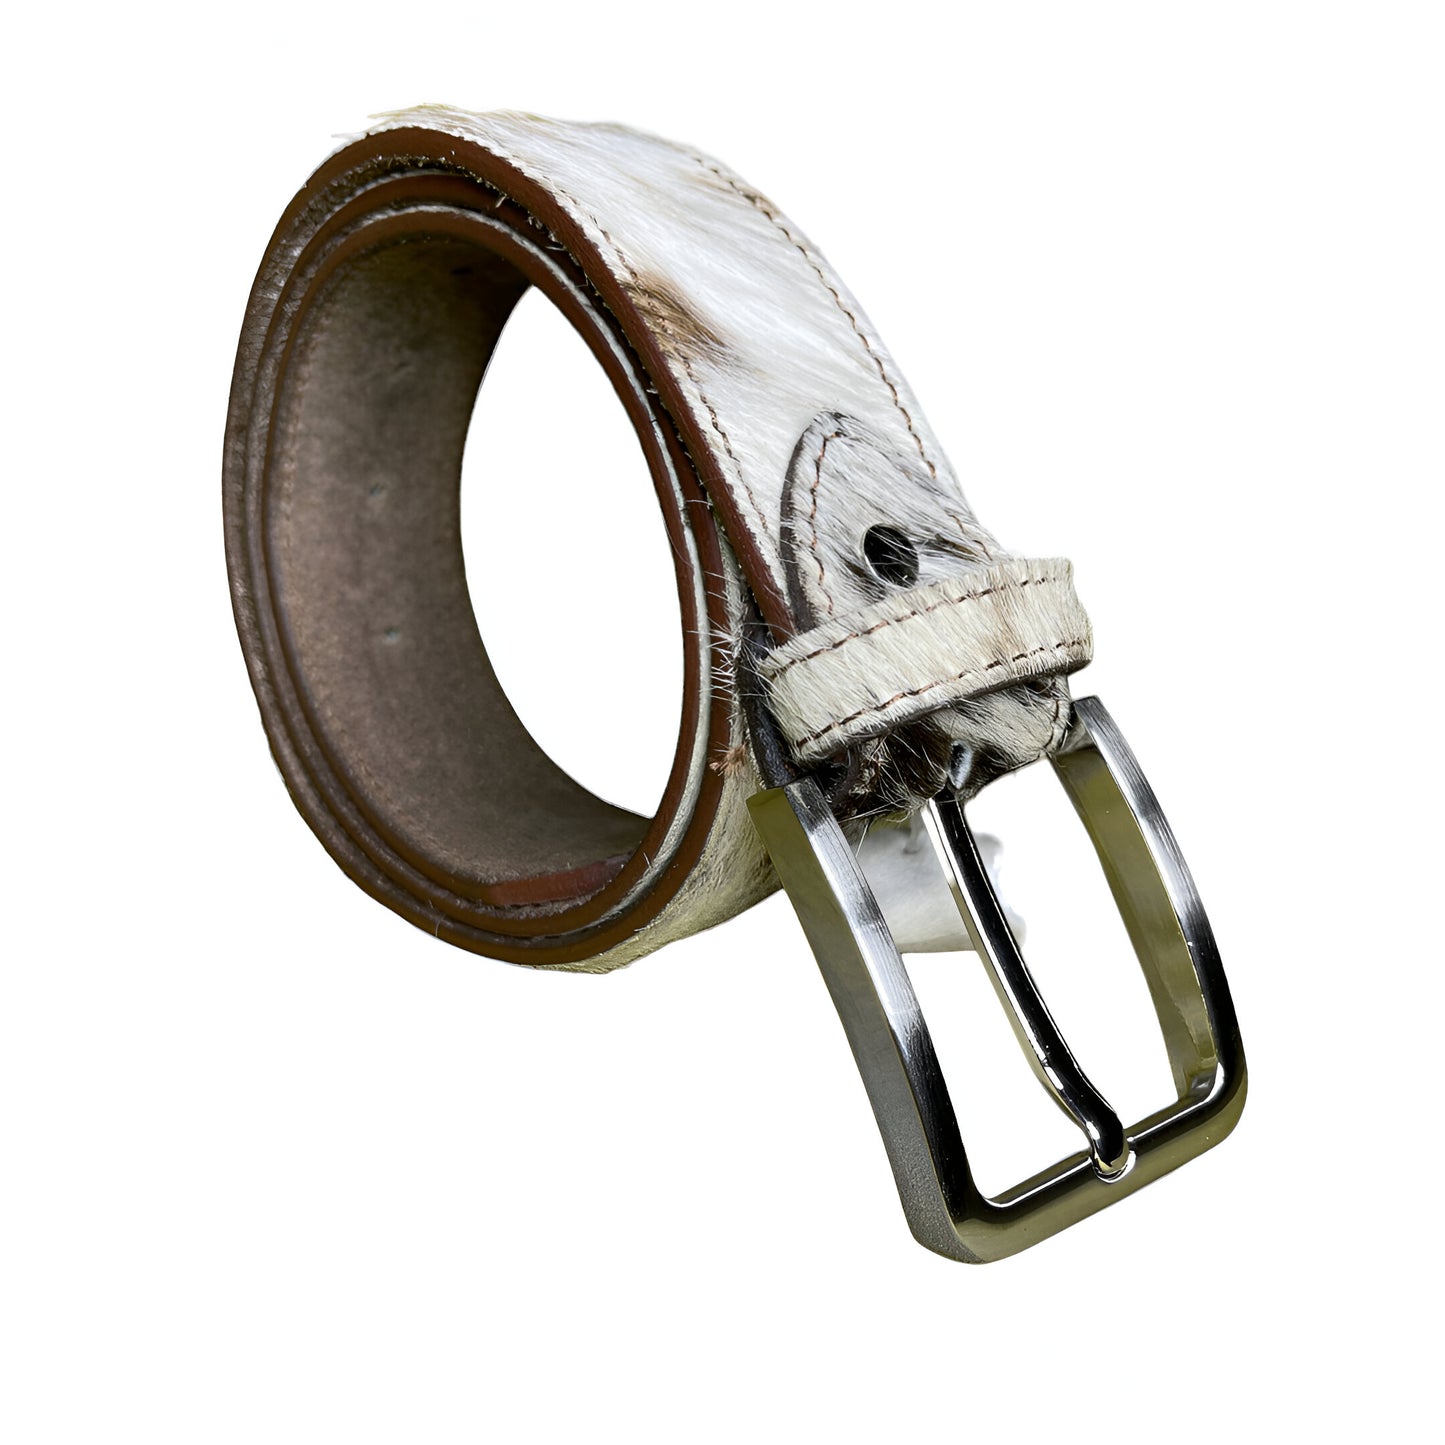 WHITE AND BROWN HAIR BELT